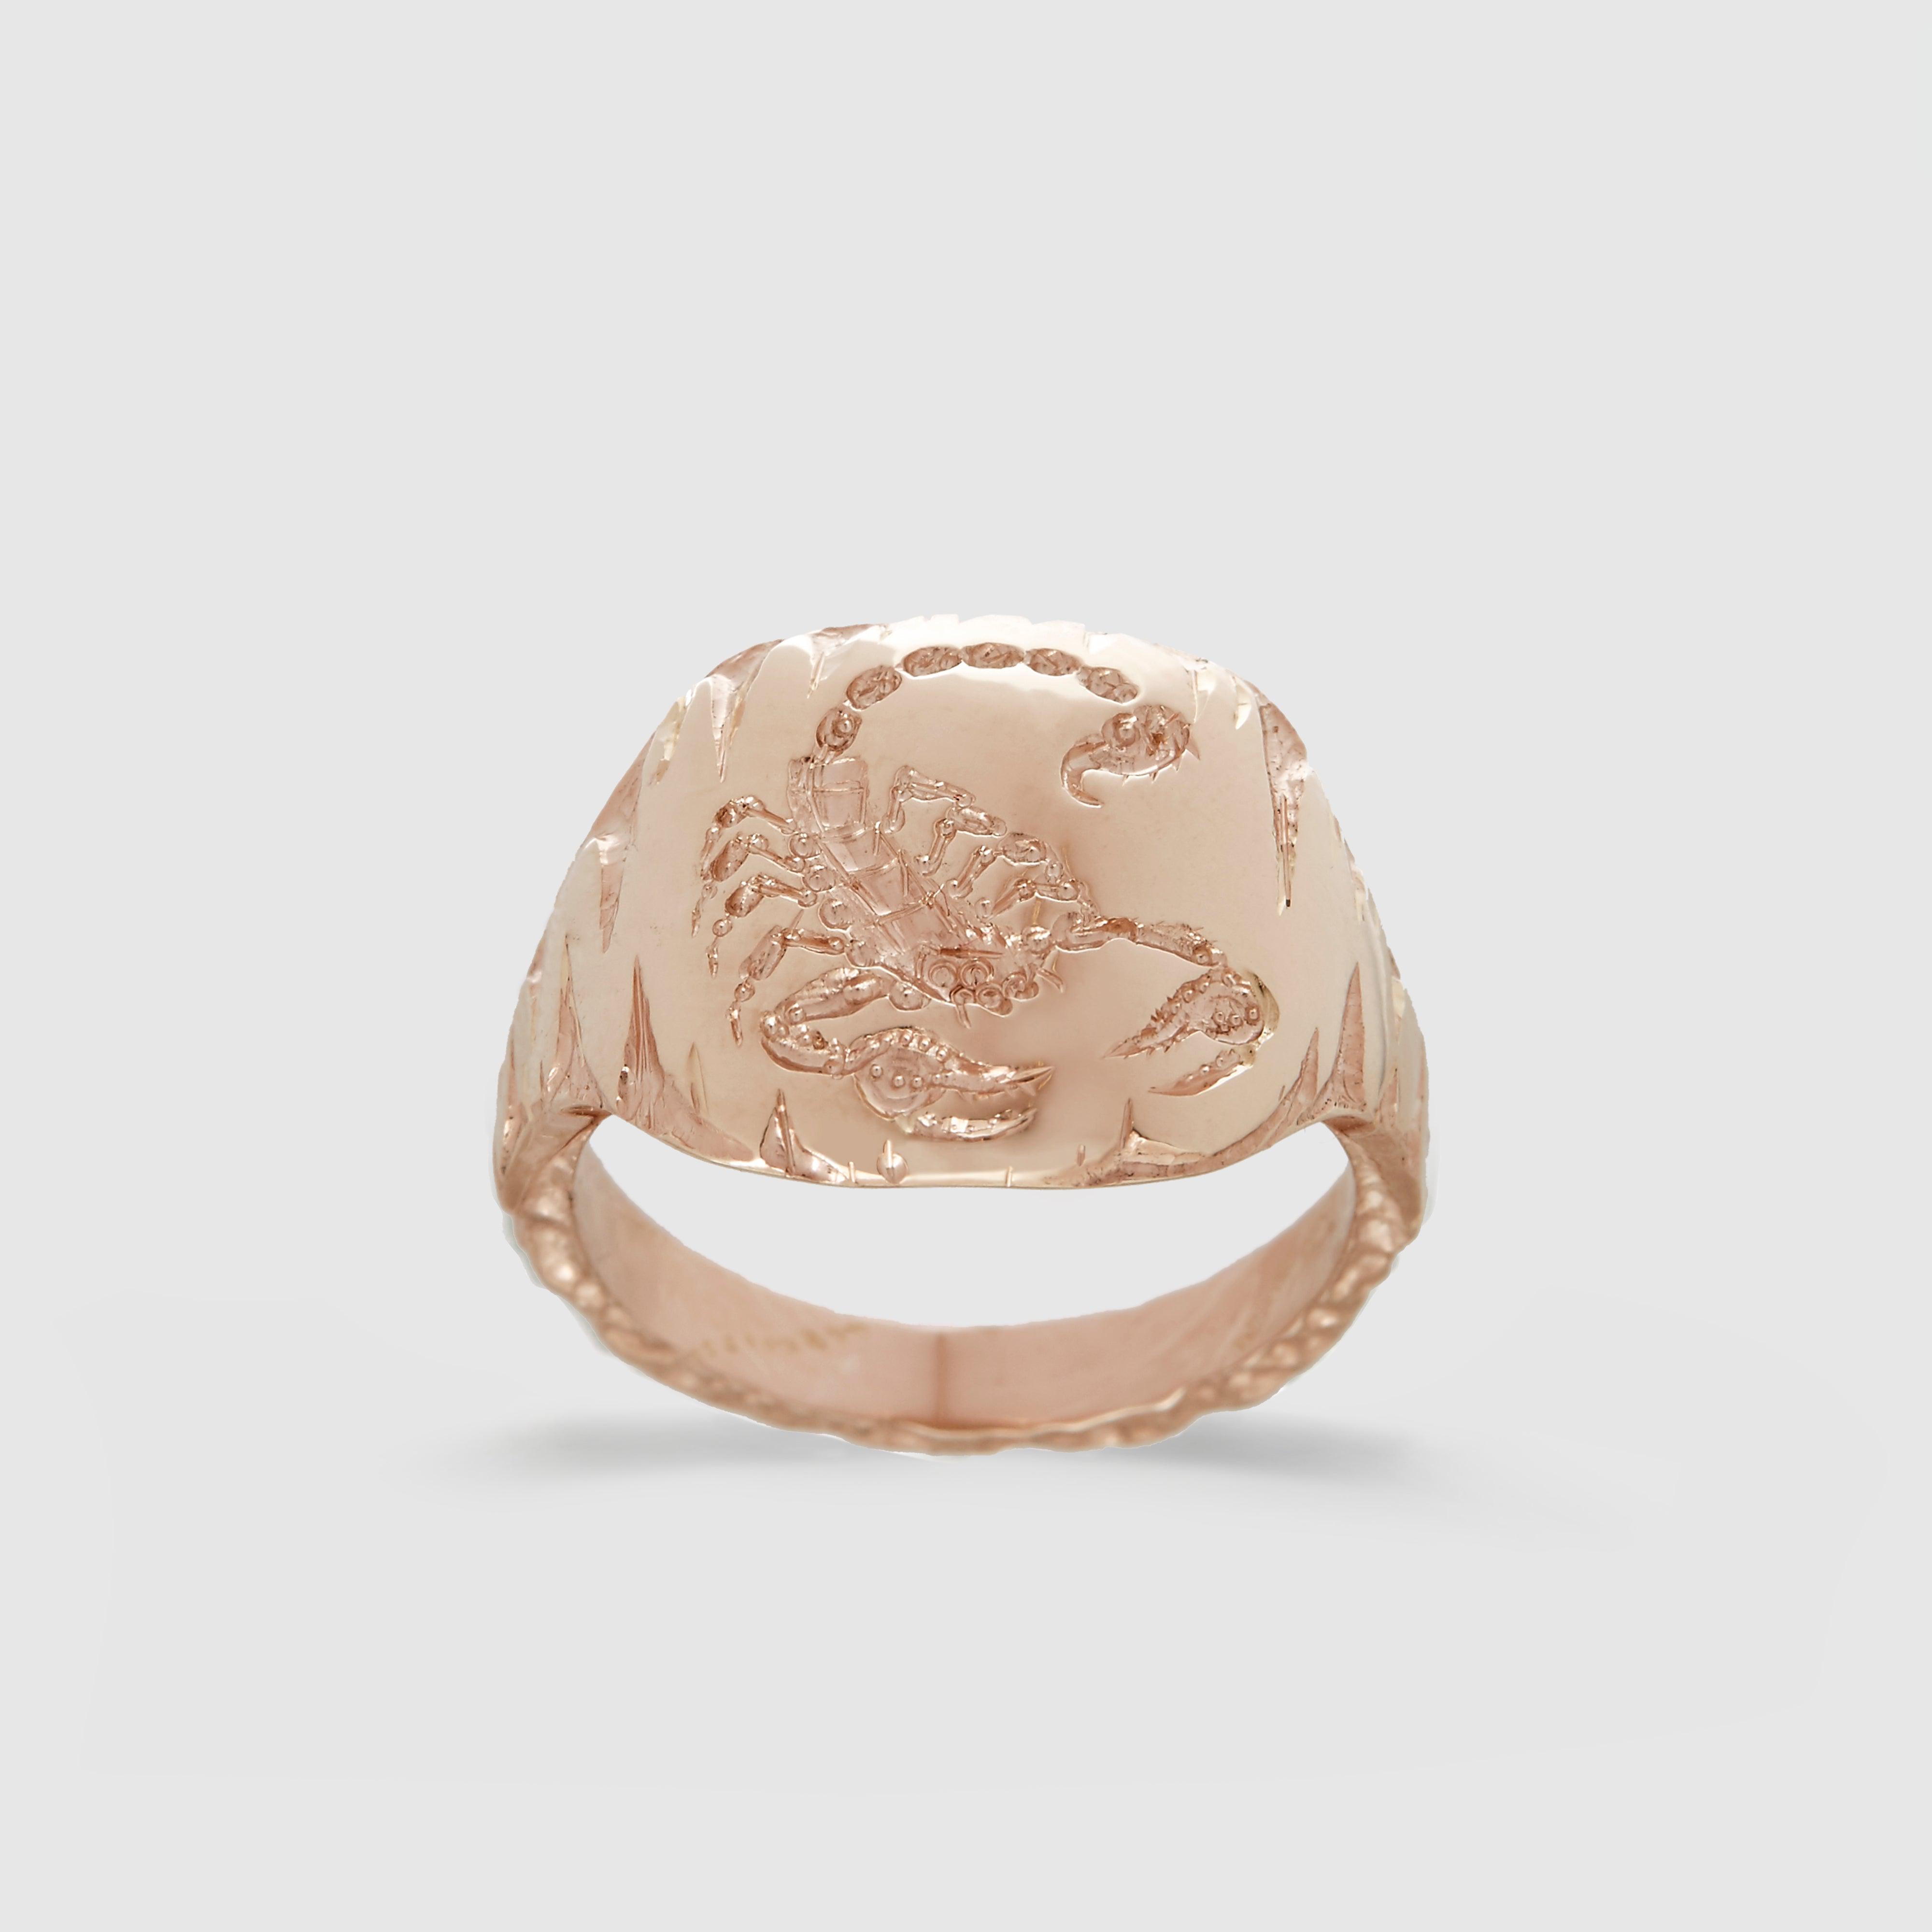 Scorpion Signet Ring by CASTRO